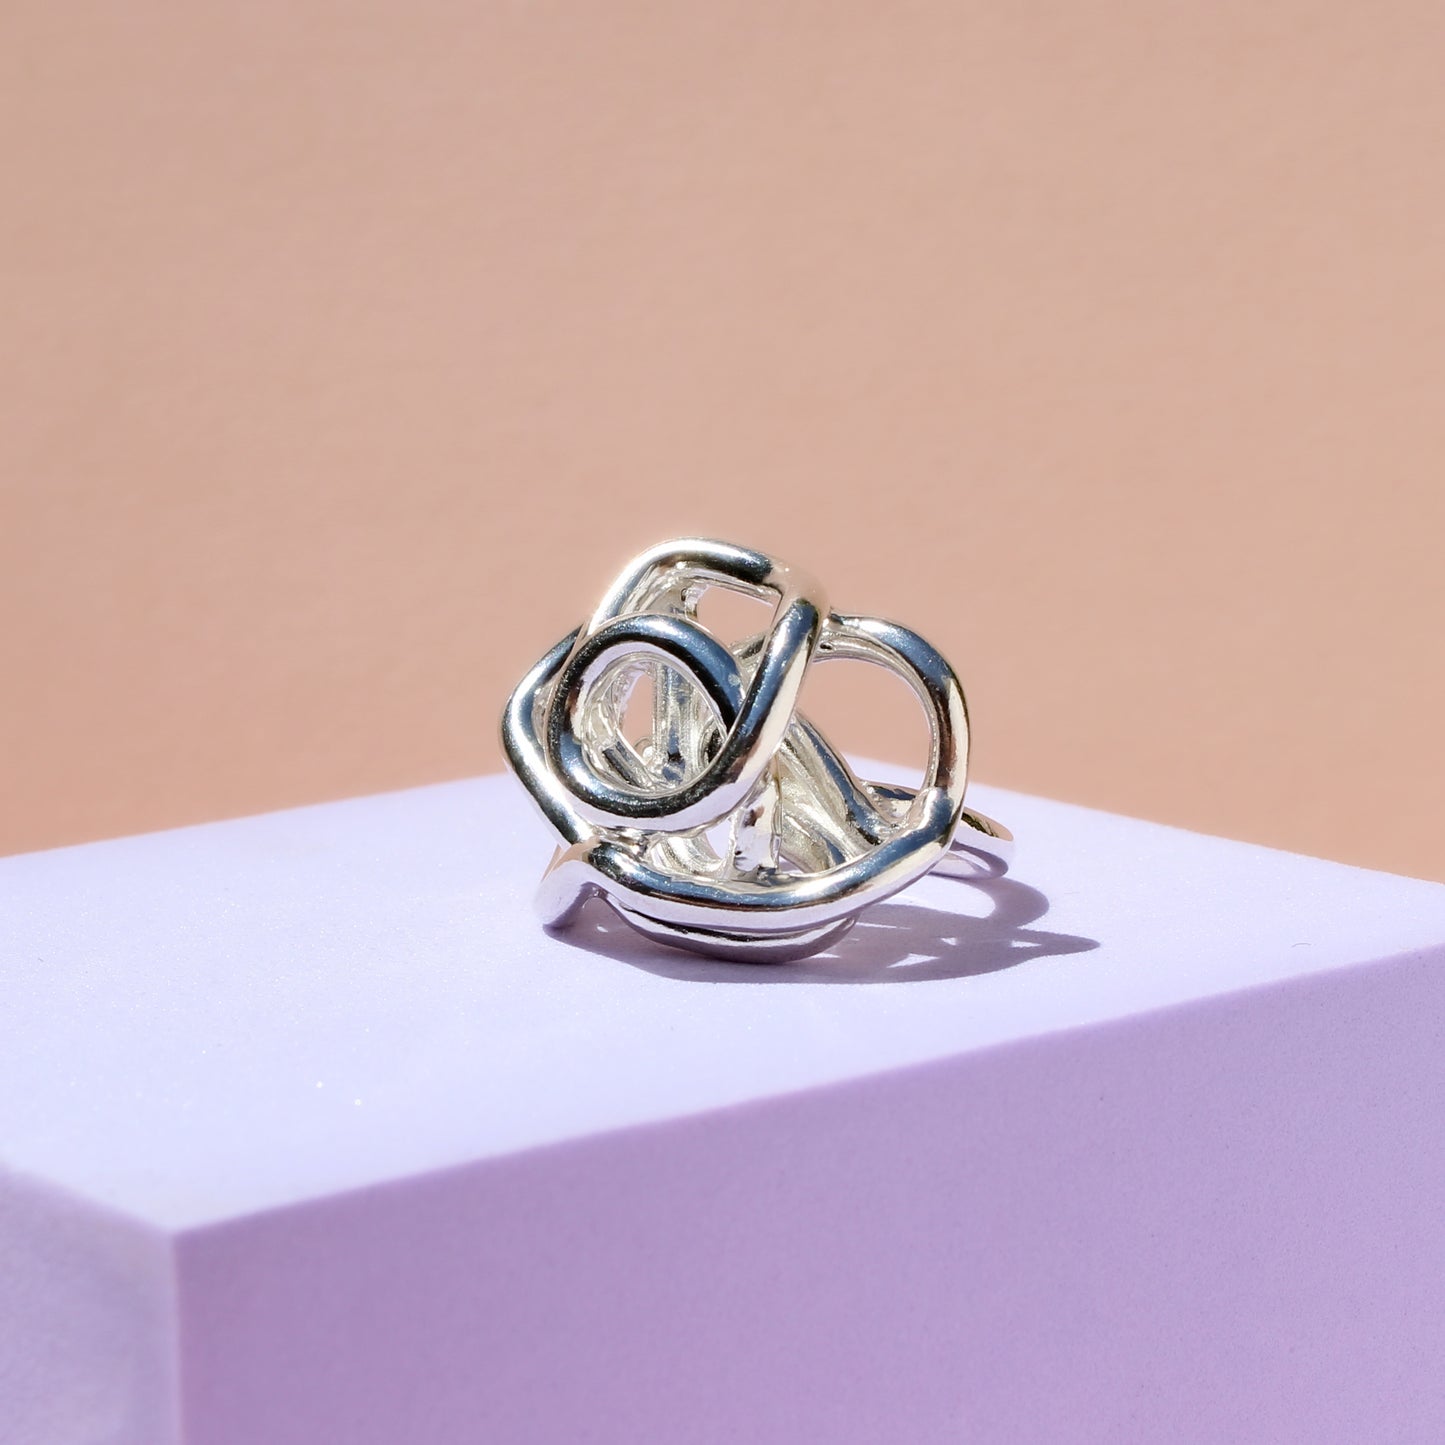 thicc sculptural ring (1 of 1)